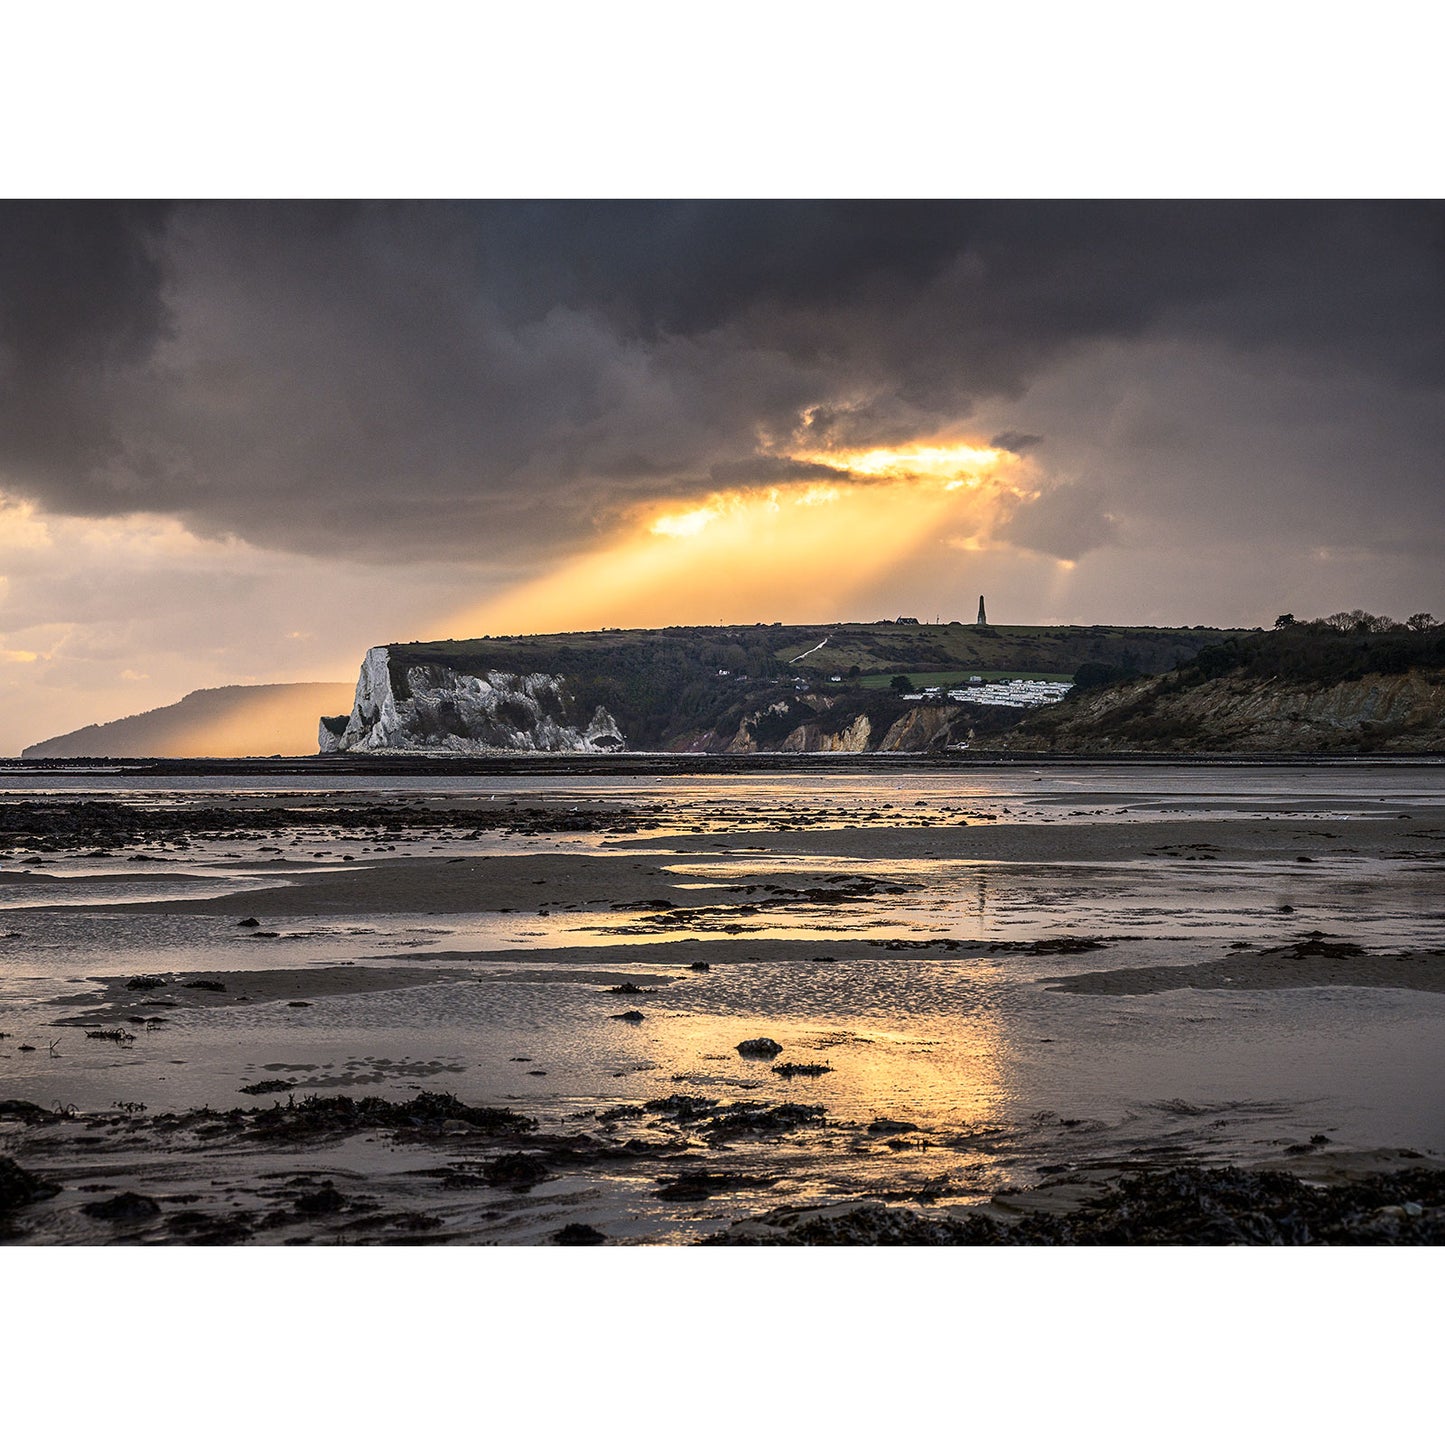 Dramatic coastline with sunrays breaking through clouds over Whitecliff Bay cliffs by a tidal flat at low light on the Isle of Wight, captured by Available Light Photography.